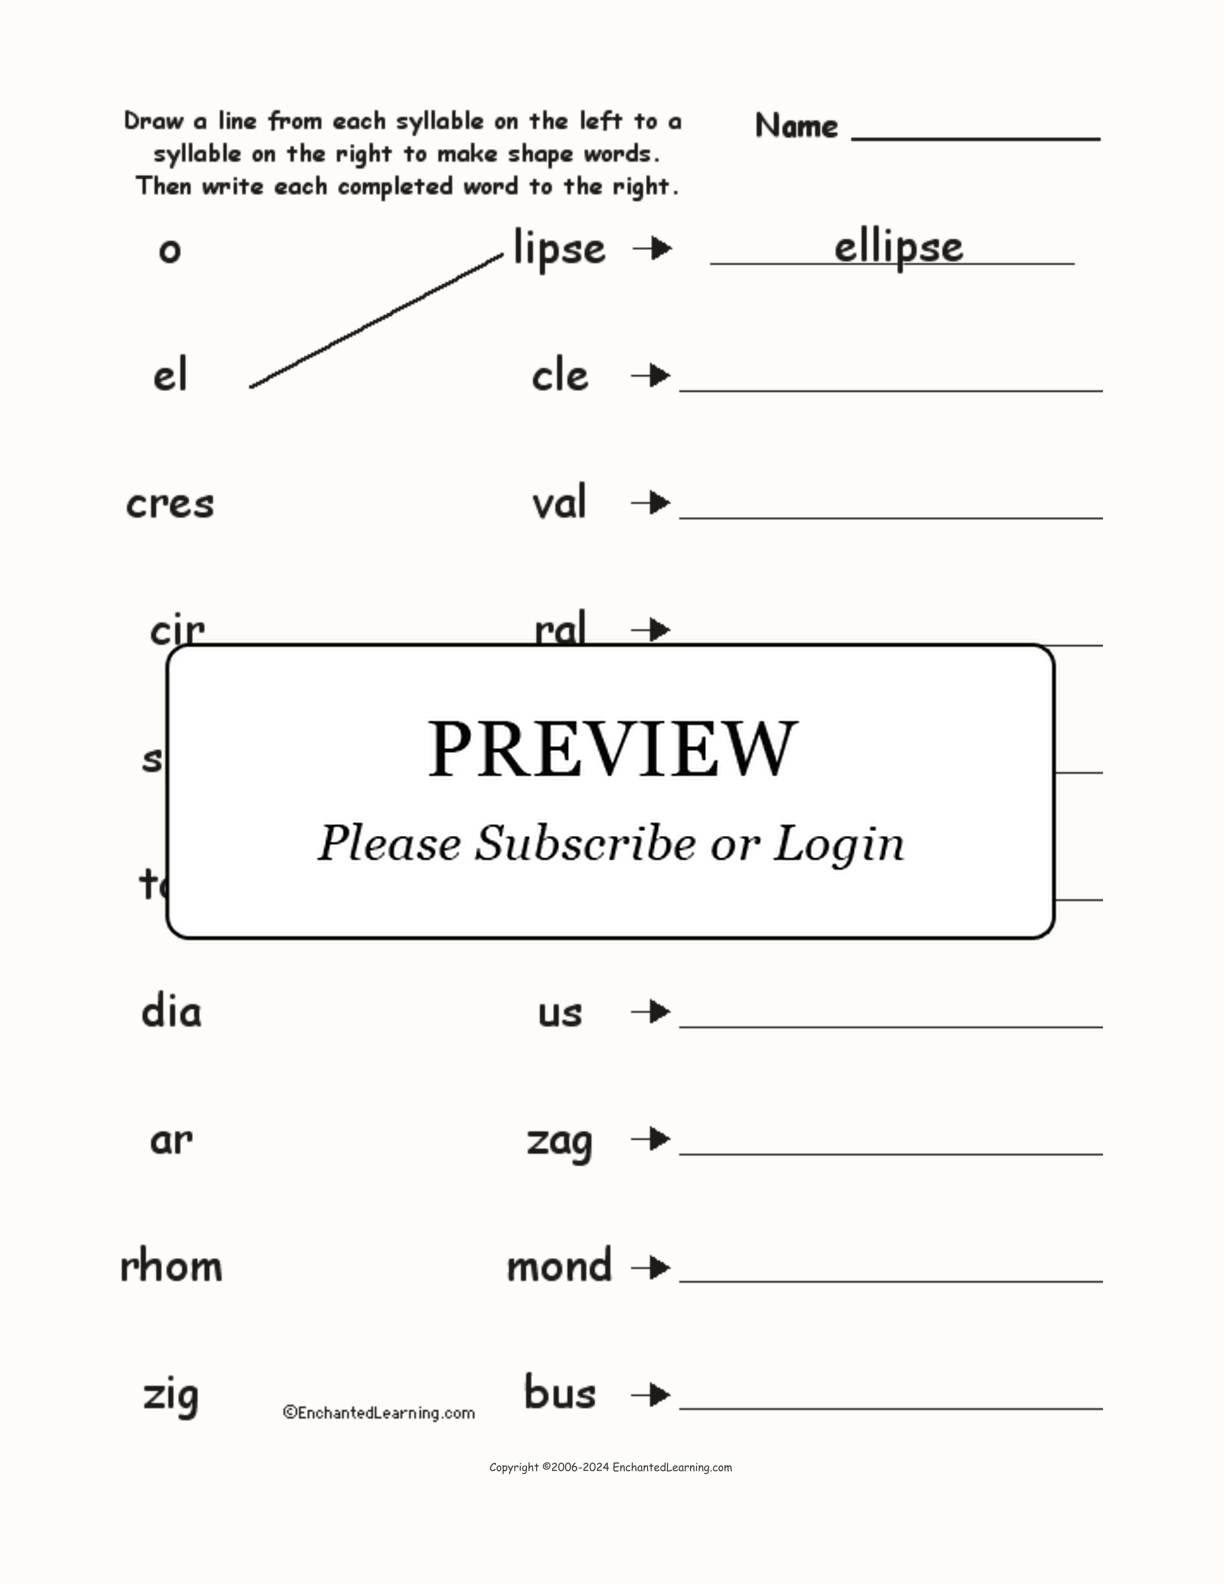 Match the Syllables: Shape Words interactive worksheet page 1